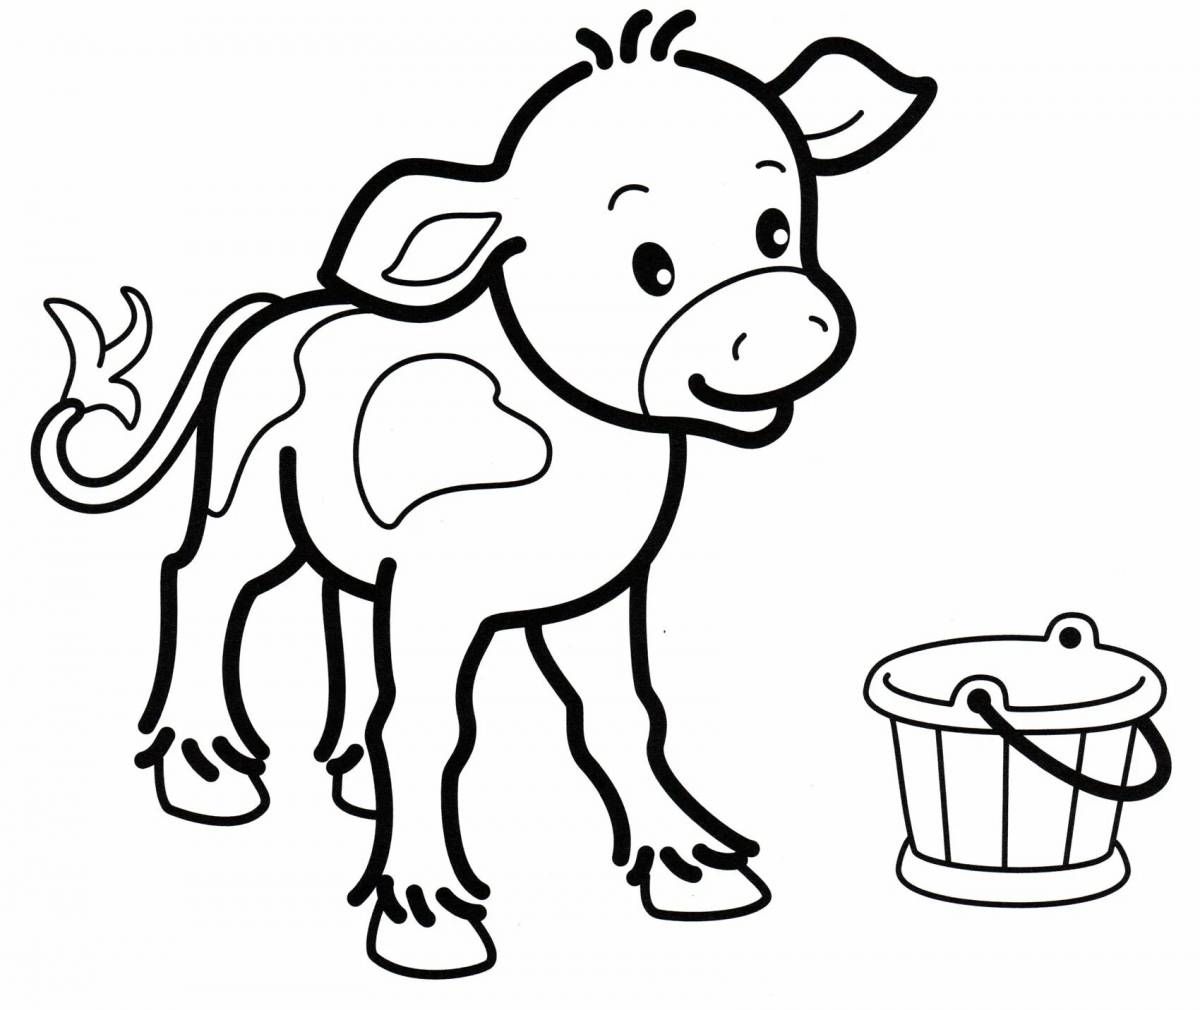 Coloring page loving cute cow